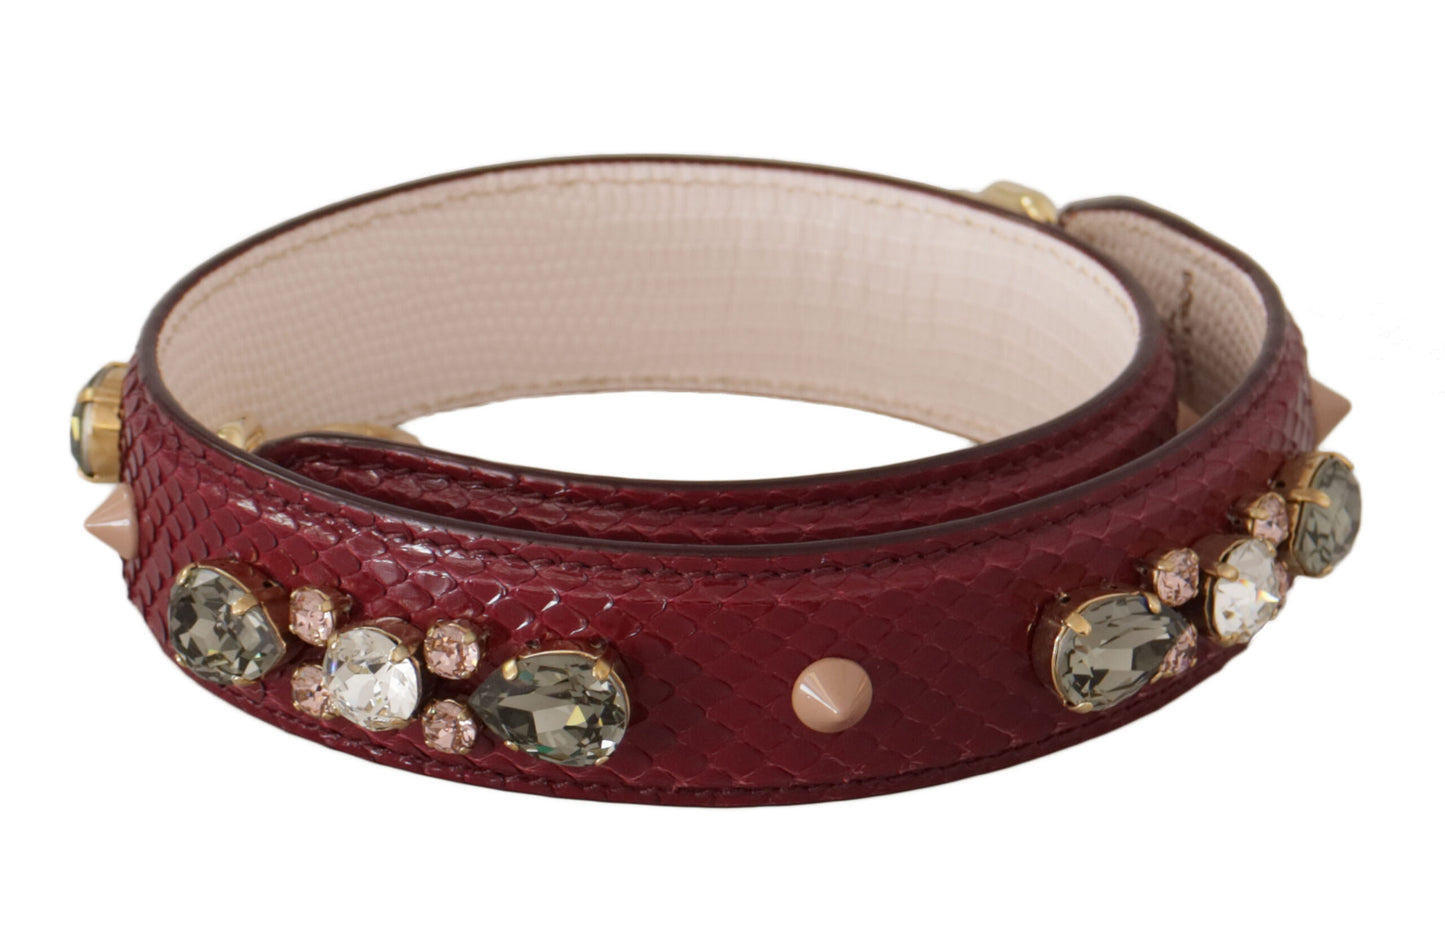 Bordeaux Leather Crystals Bag Shoulder Strap - Designed by Dolce & Gabbana Available to Buy at a Discounted Price on Moon Behind The Hill Online Designer Discount Store